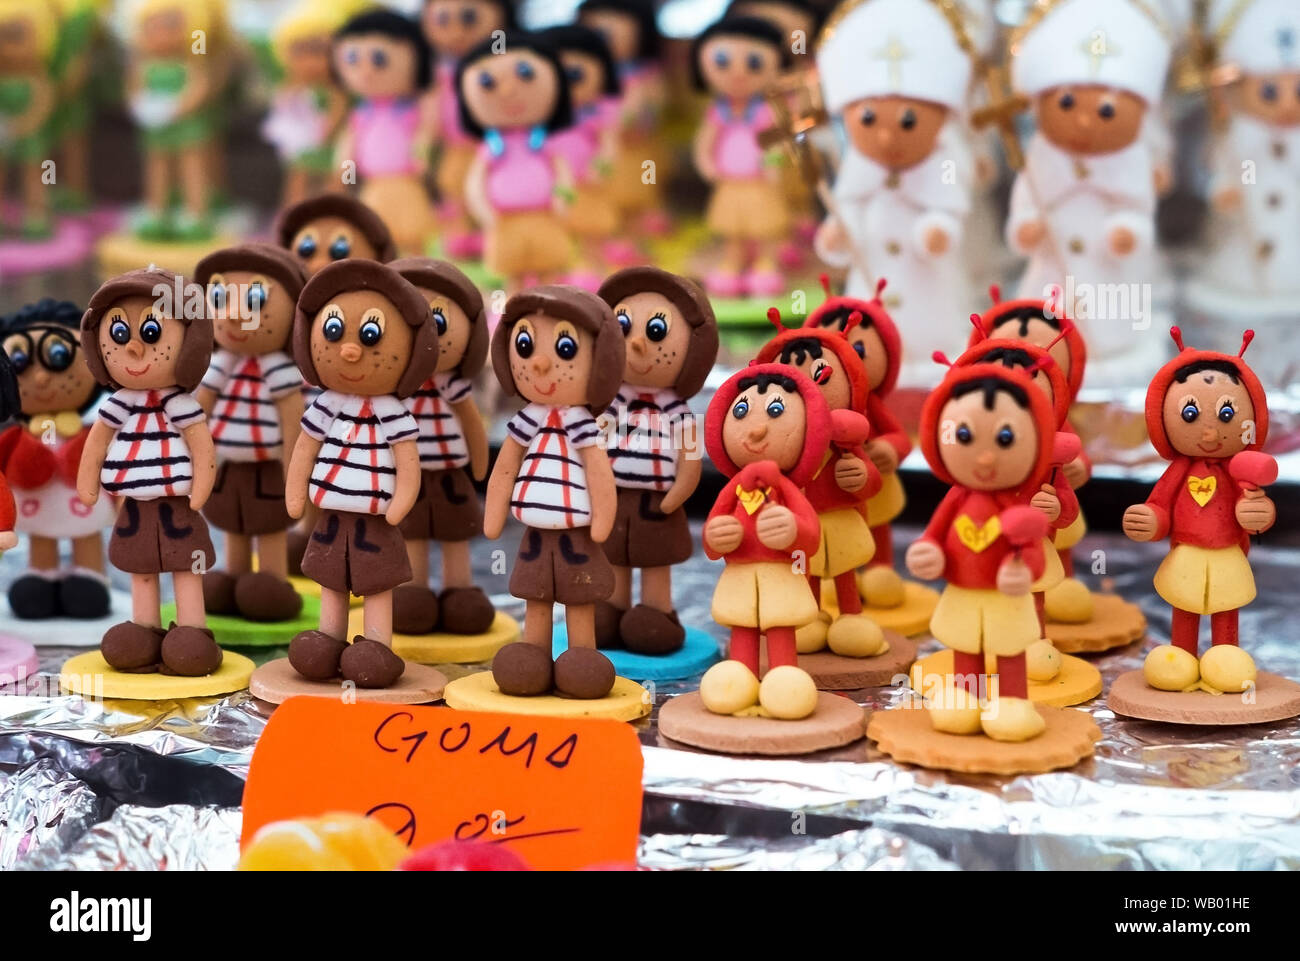 Candy sweets alfeniques chavo del ocho of the Day of the Dead celebration of Mexico Stock Photo